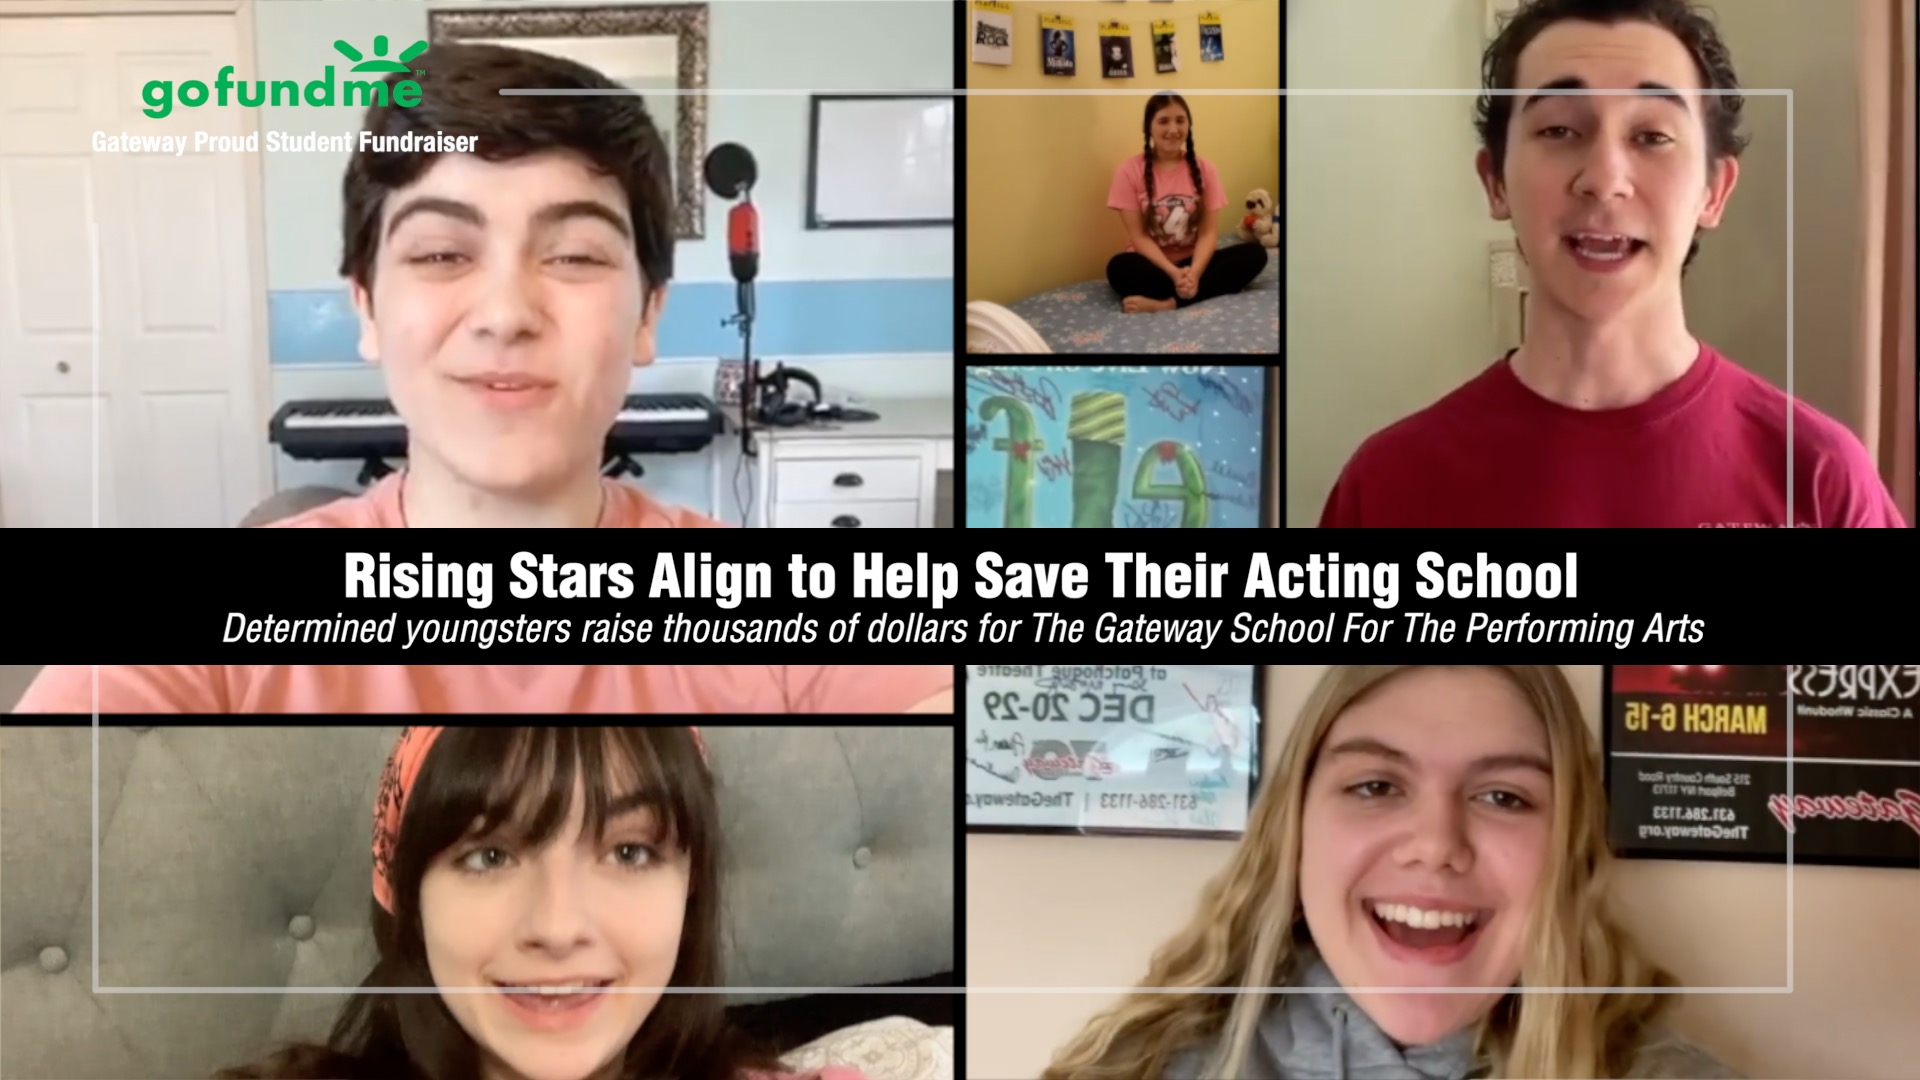 Rising Stars Align to Help Save The Gateway School for the Performing Arts